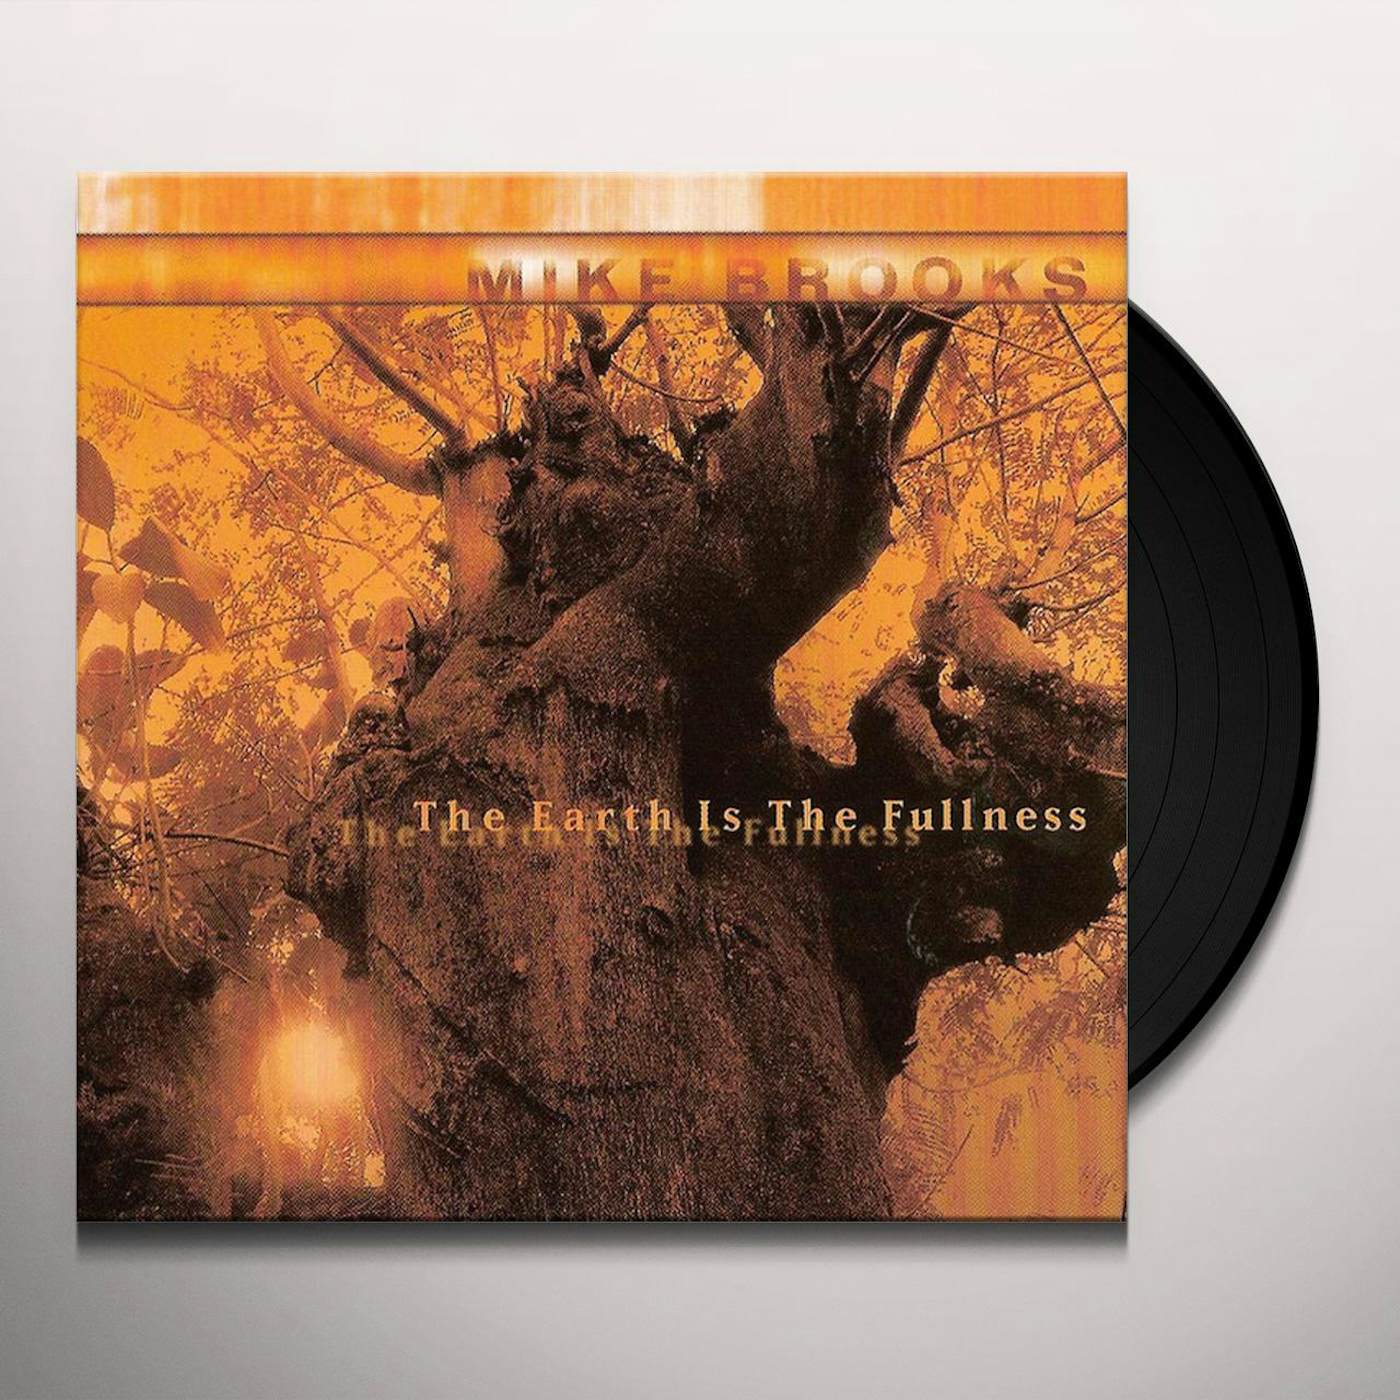 Mike Brooks EARTH IS THE FULLNESS Vinyl Record